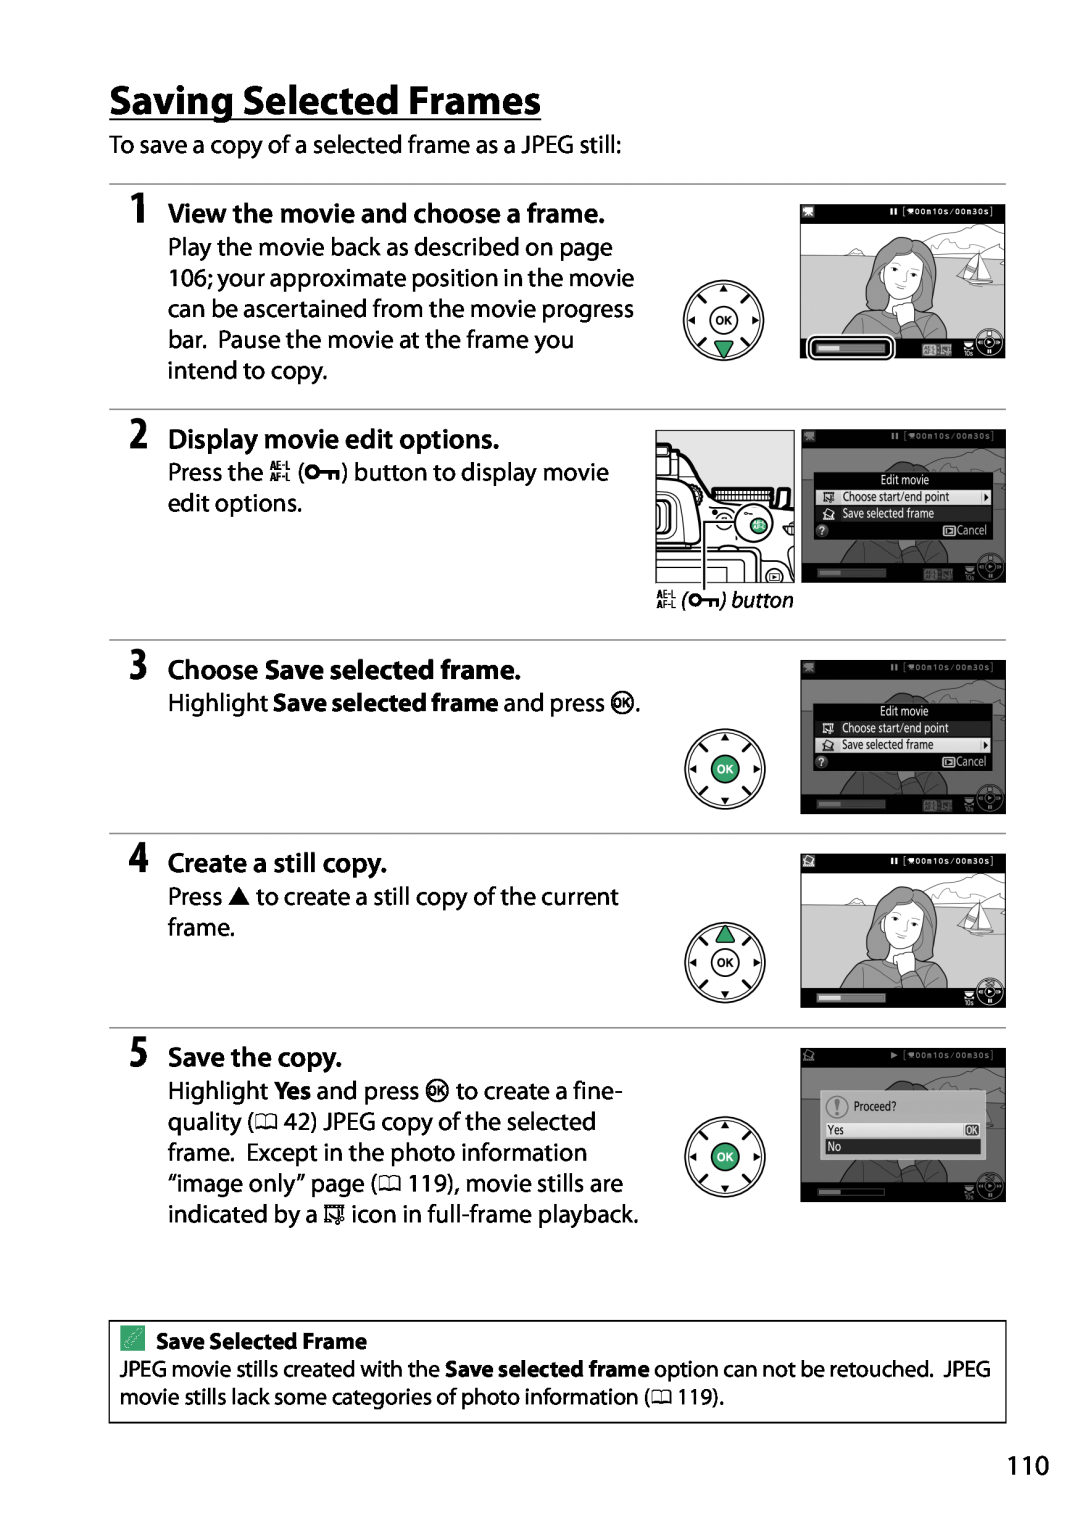 Nikon 1511 Saving Selected Frames, View the movie and choose a frame, Display movie edit options, Create a still copy 